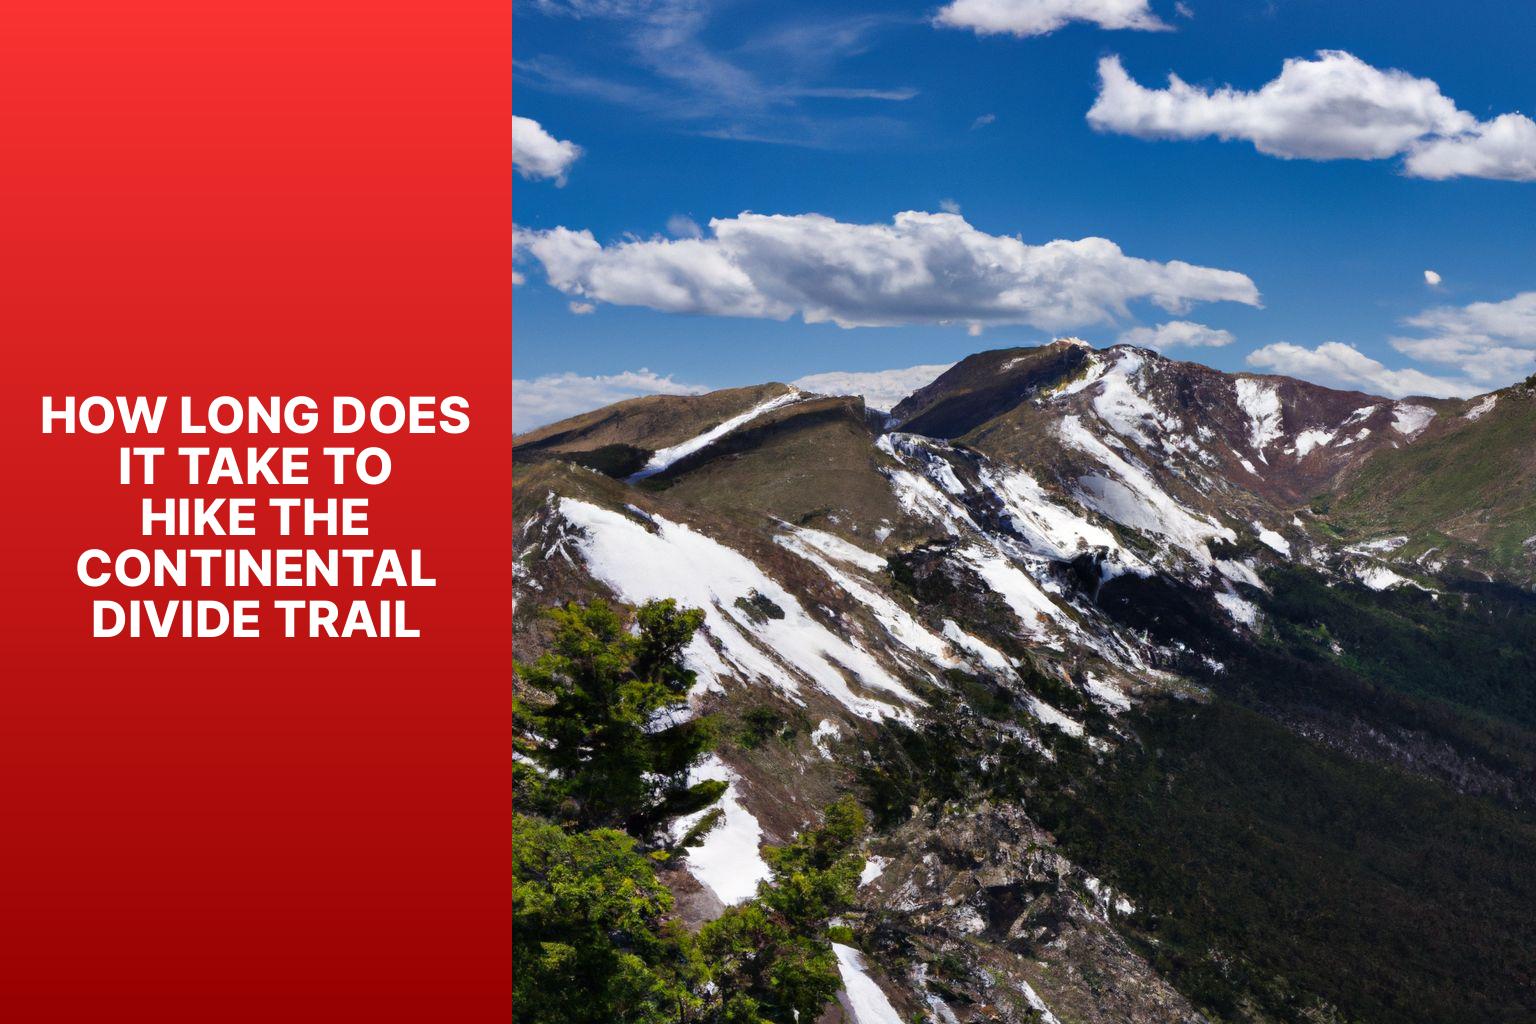 how long does it take to hike the continental divide trailai4v